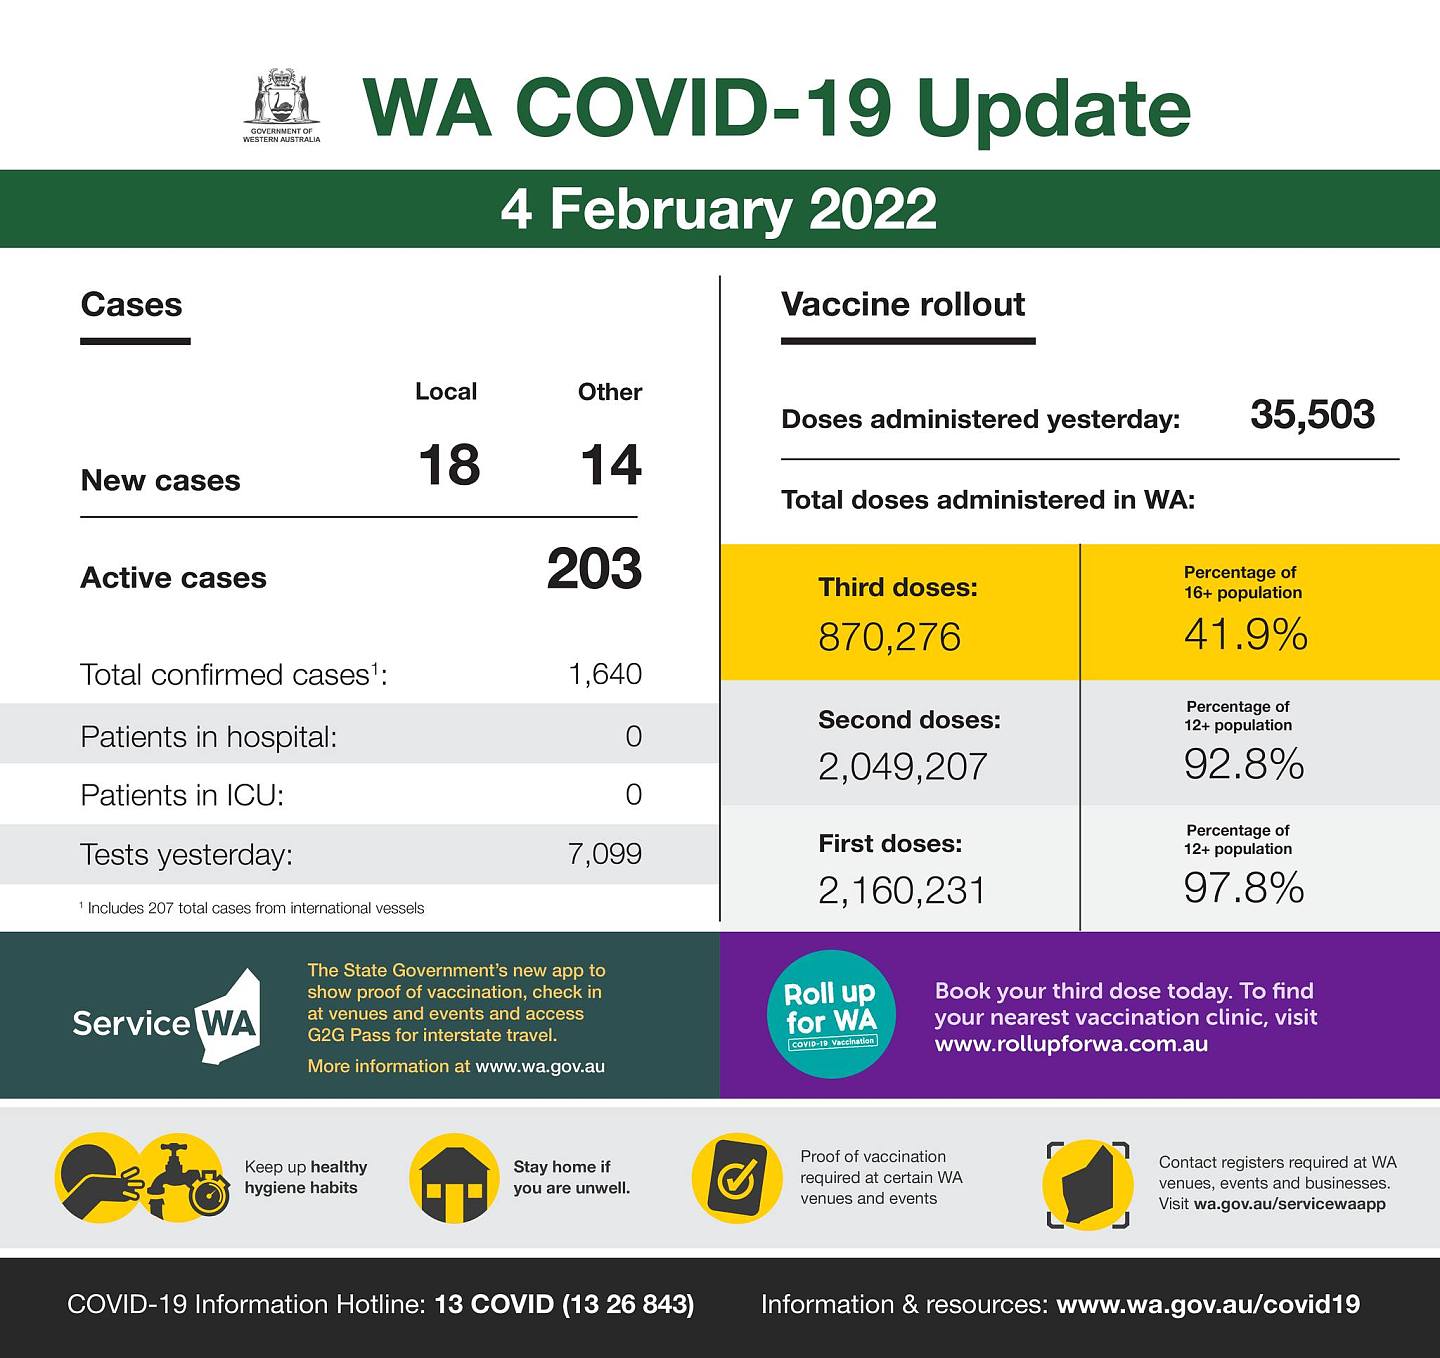 May be an image of text that says 'ÛI Cases WA COVID-19 Update 4 February 2022 Local Vaccine rollout Other New cases 18 14 Active cases yesterday: Total doses administered 35,503 203 Total confirmed cases1 WA: Patients in hospital: Third doses: 870,276 1,640 Patients in ICU: 0 +population 41.9% Tests yesterday: 0 Second doses: 2,049,207 Includes total cases 7,099 vessels Percentage 12+population 92.8% First doses: 2,160,231 Service WA Percentag access 97.8% Roll WA Keepu healthy Book your third dose today. find clinic, visit www.rollupforwa.com.au Stay home you unwell. events COVID 19 Information Hotline: 13 COVID (13 26 843) Contact atWA wa.gov.au/servicewaapp Information & resources: www.wa.gov.au/covid19'